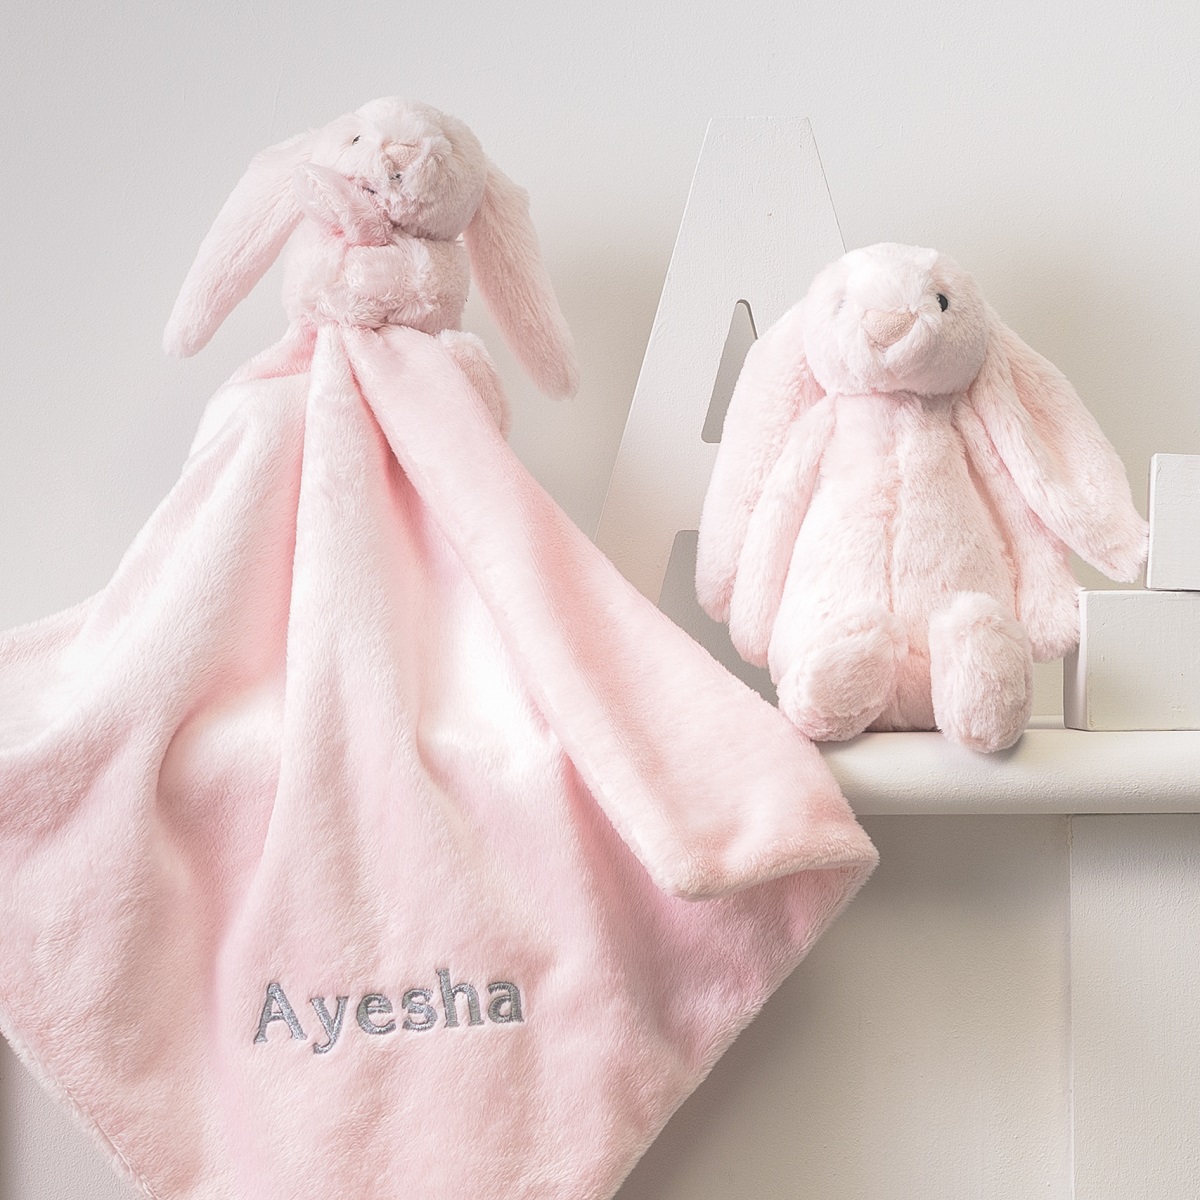 Personalised Jellycat bashful comforter & toy gift set in grey or pale pink